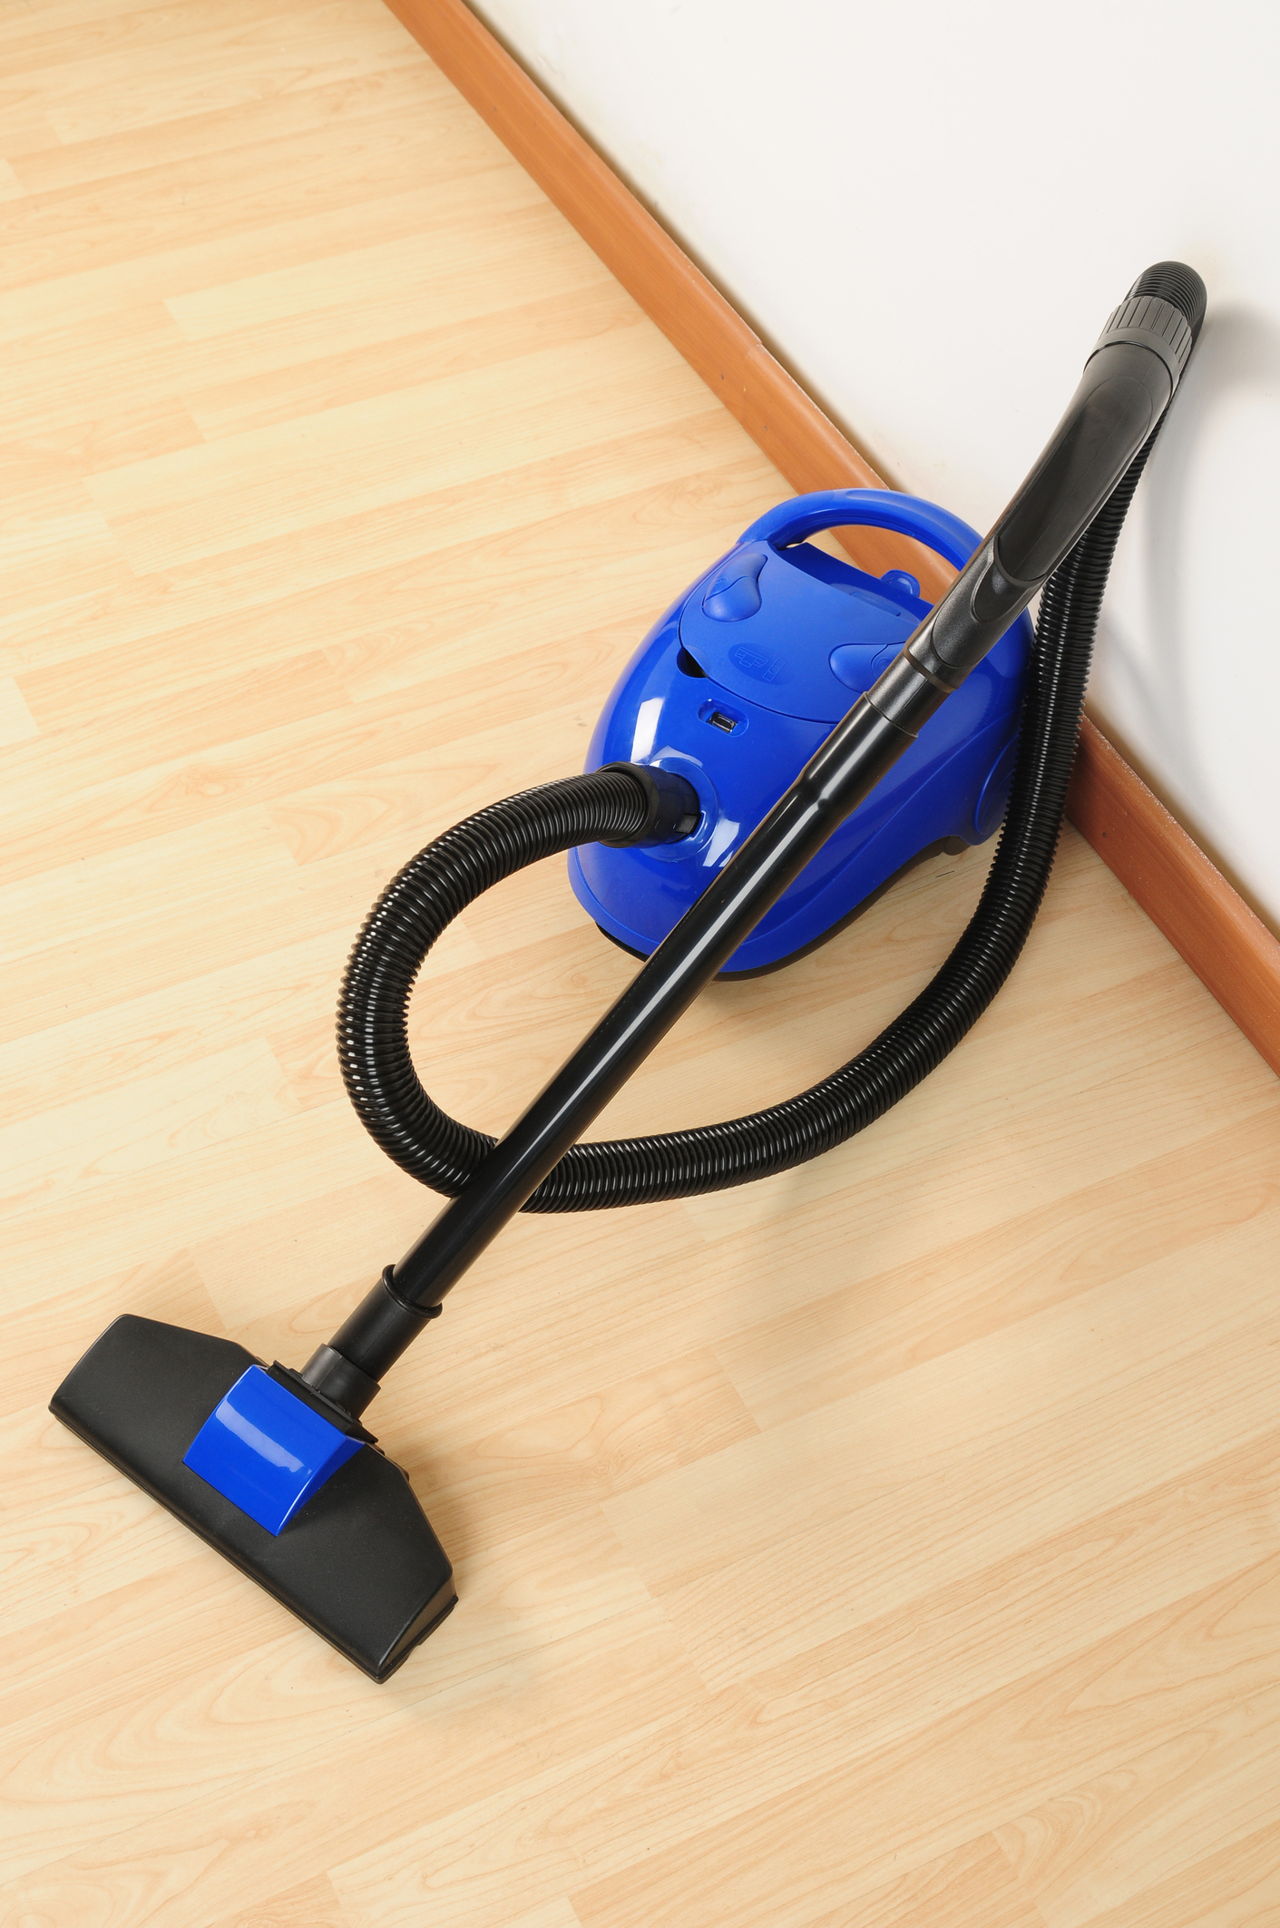 Clean Laminate Floors Without Streaking, How To Clean Porcelain Tile Floors Without Streaks